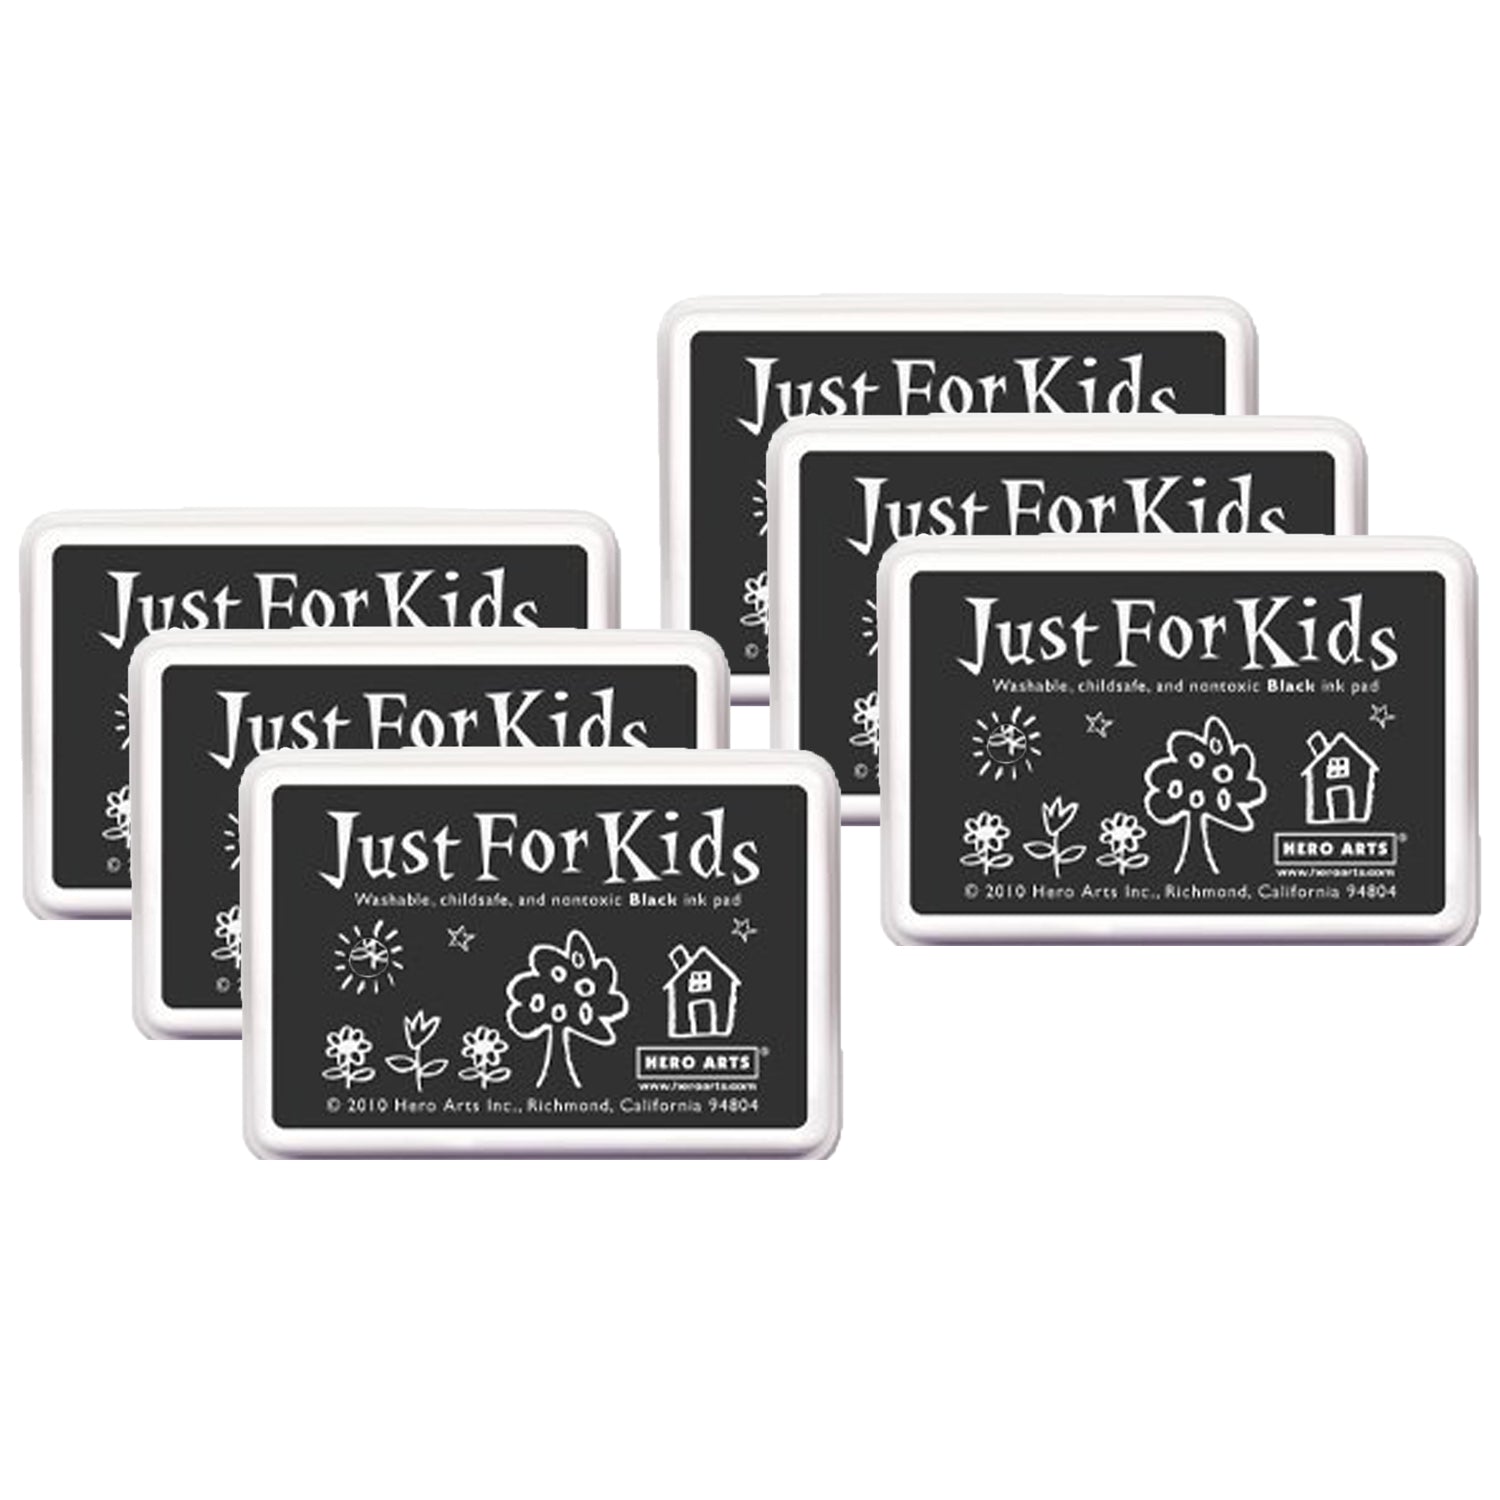 Just for Kids® Ink Pad, Black, Pack of 6